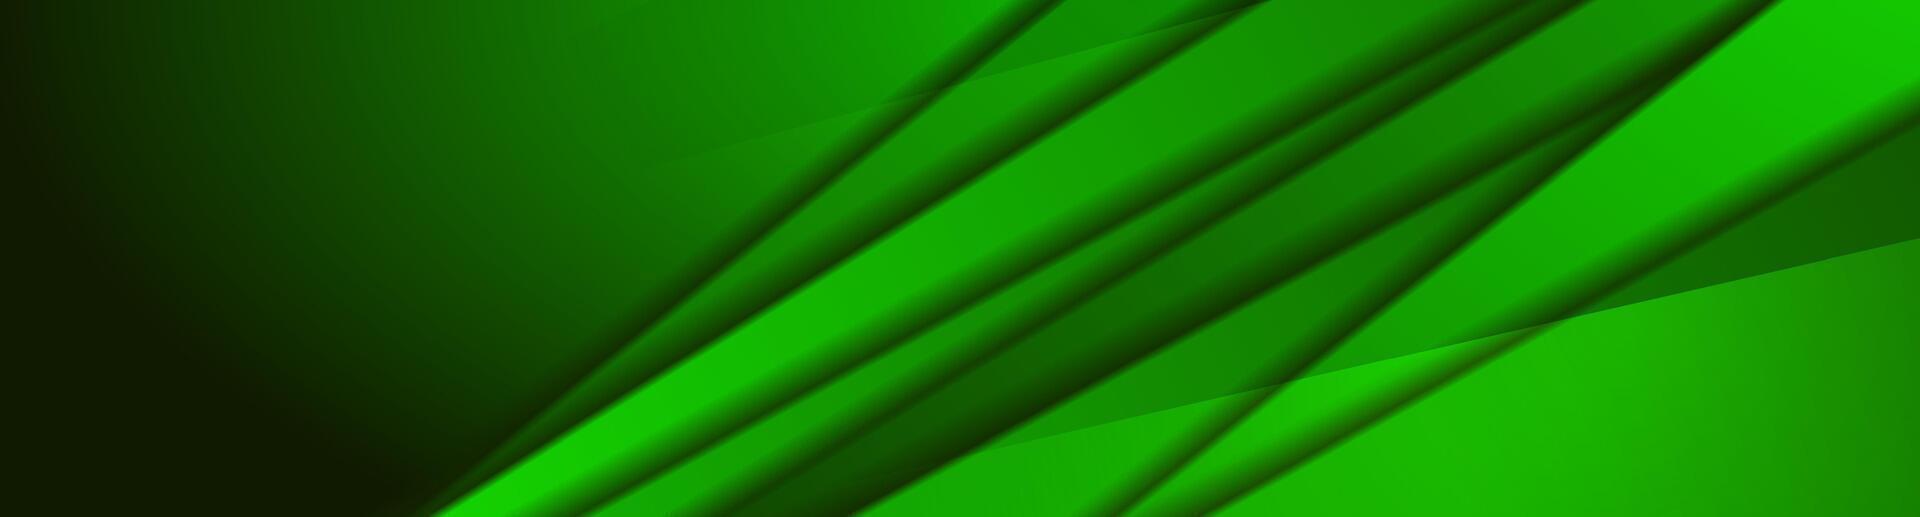 Green glossy geometric stripes abstract corporate background vector